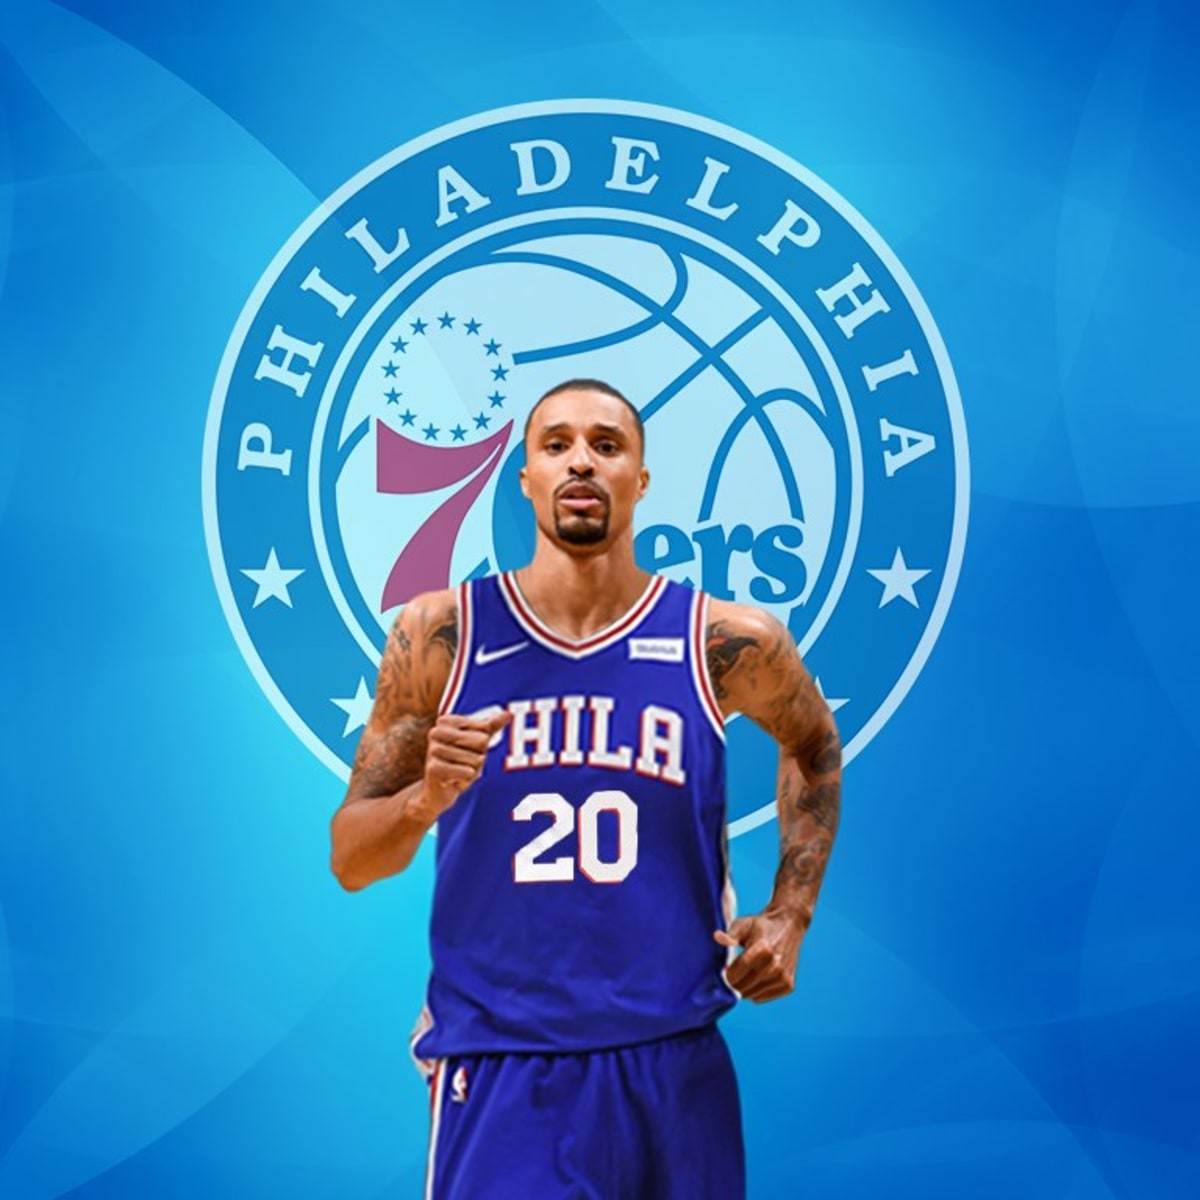 George Hill Royal Philadelphia 76ers Player-Issued #33 Jersey from